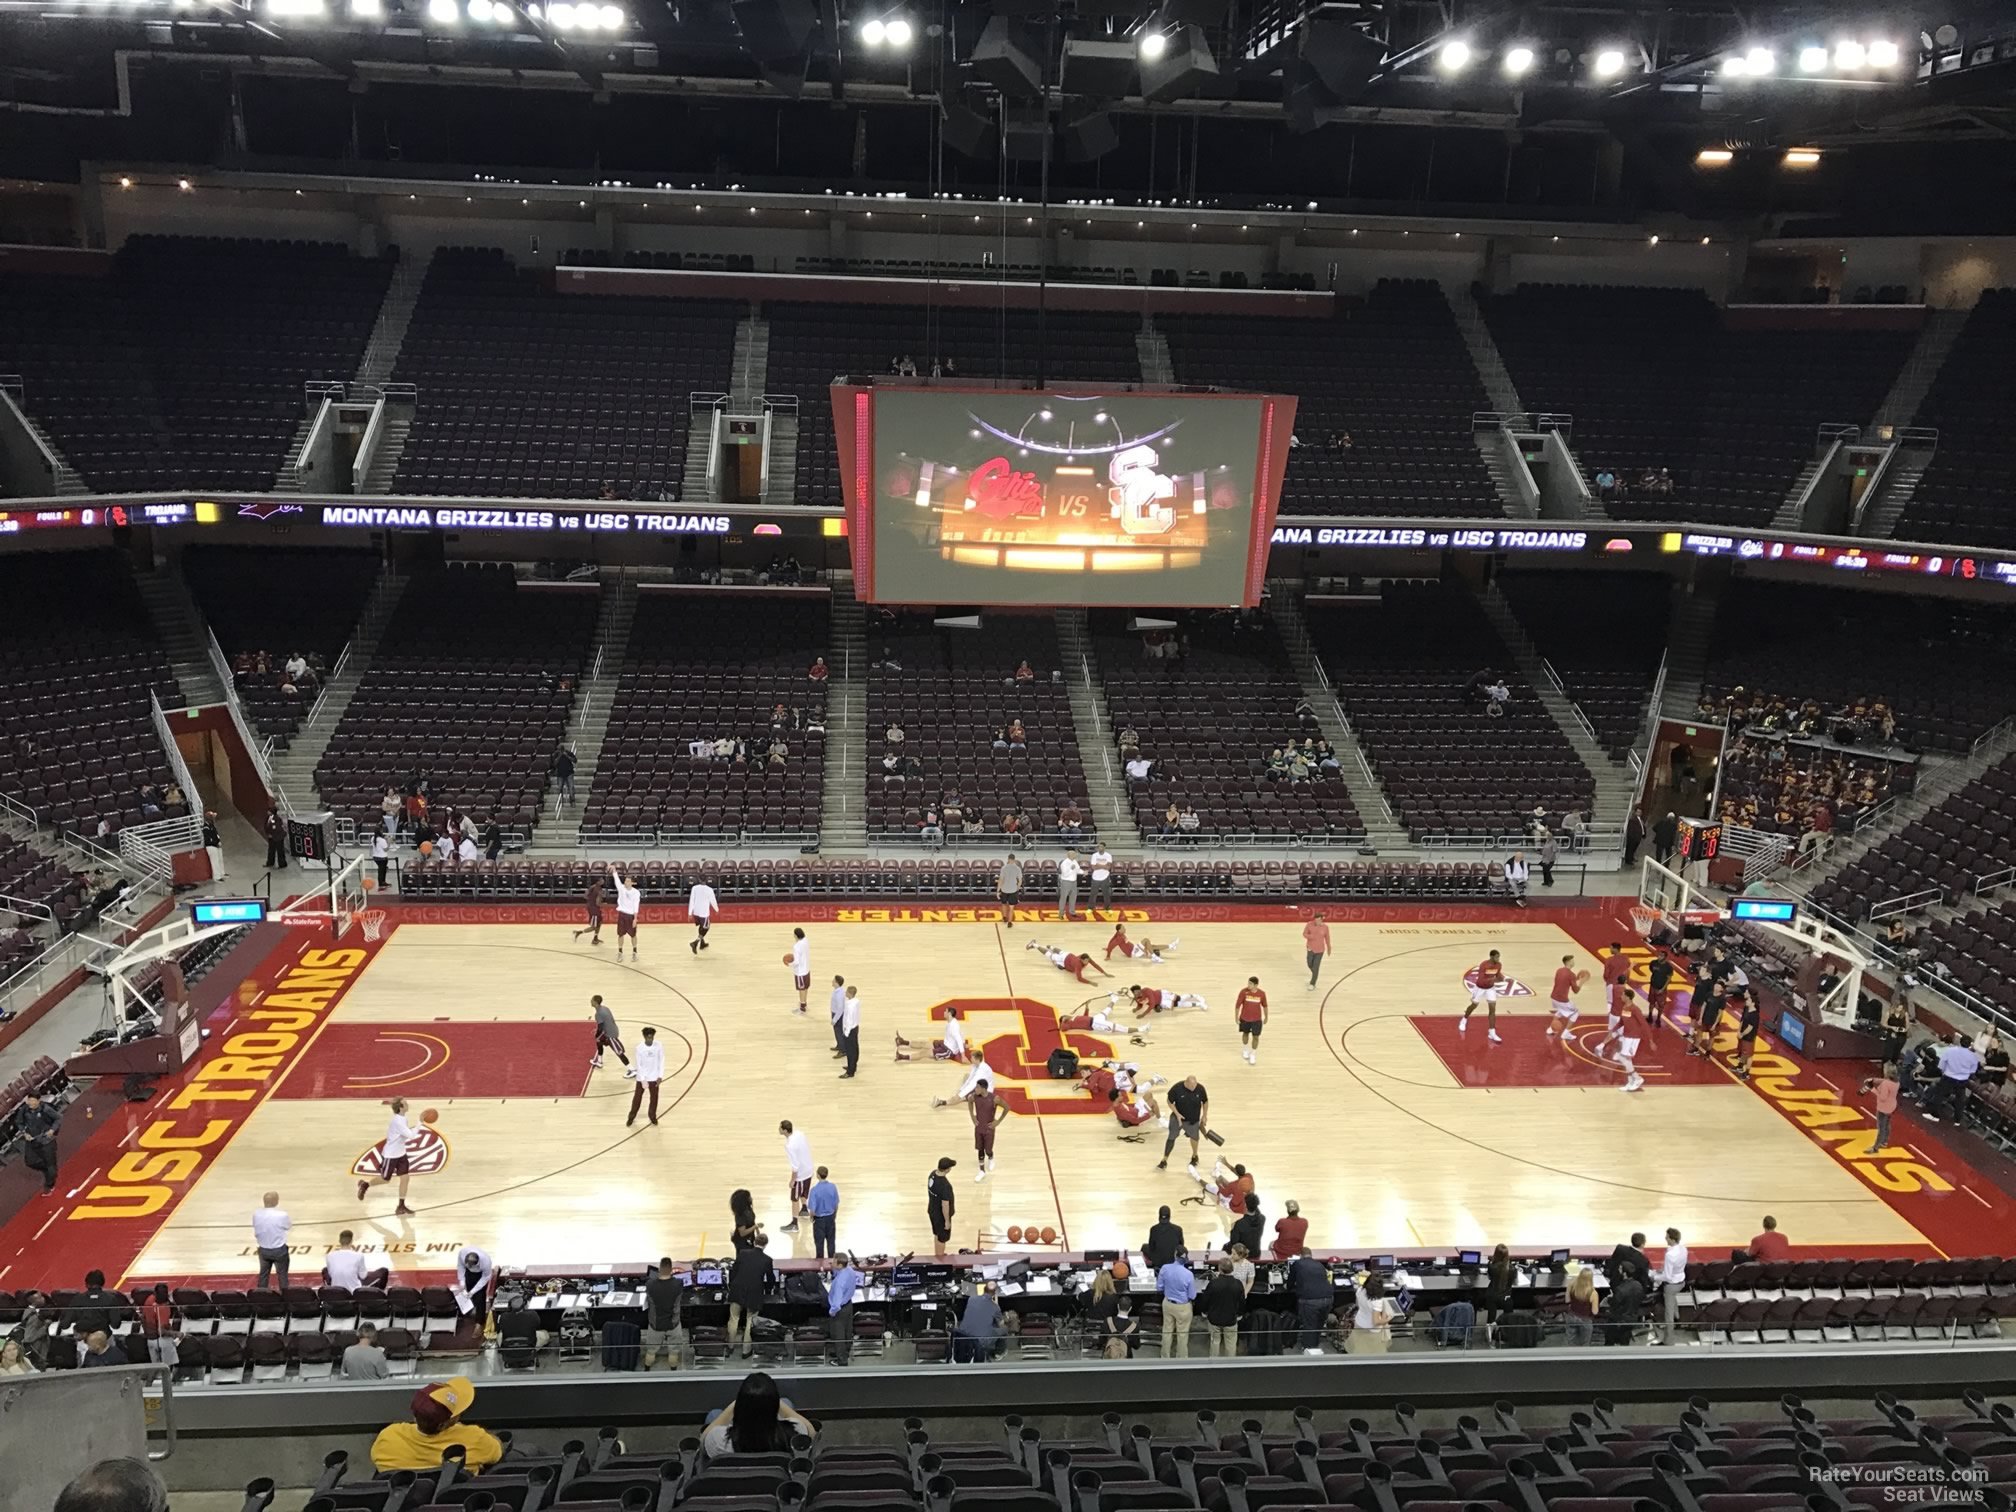 section 218, row 10 seat view  - galen center